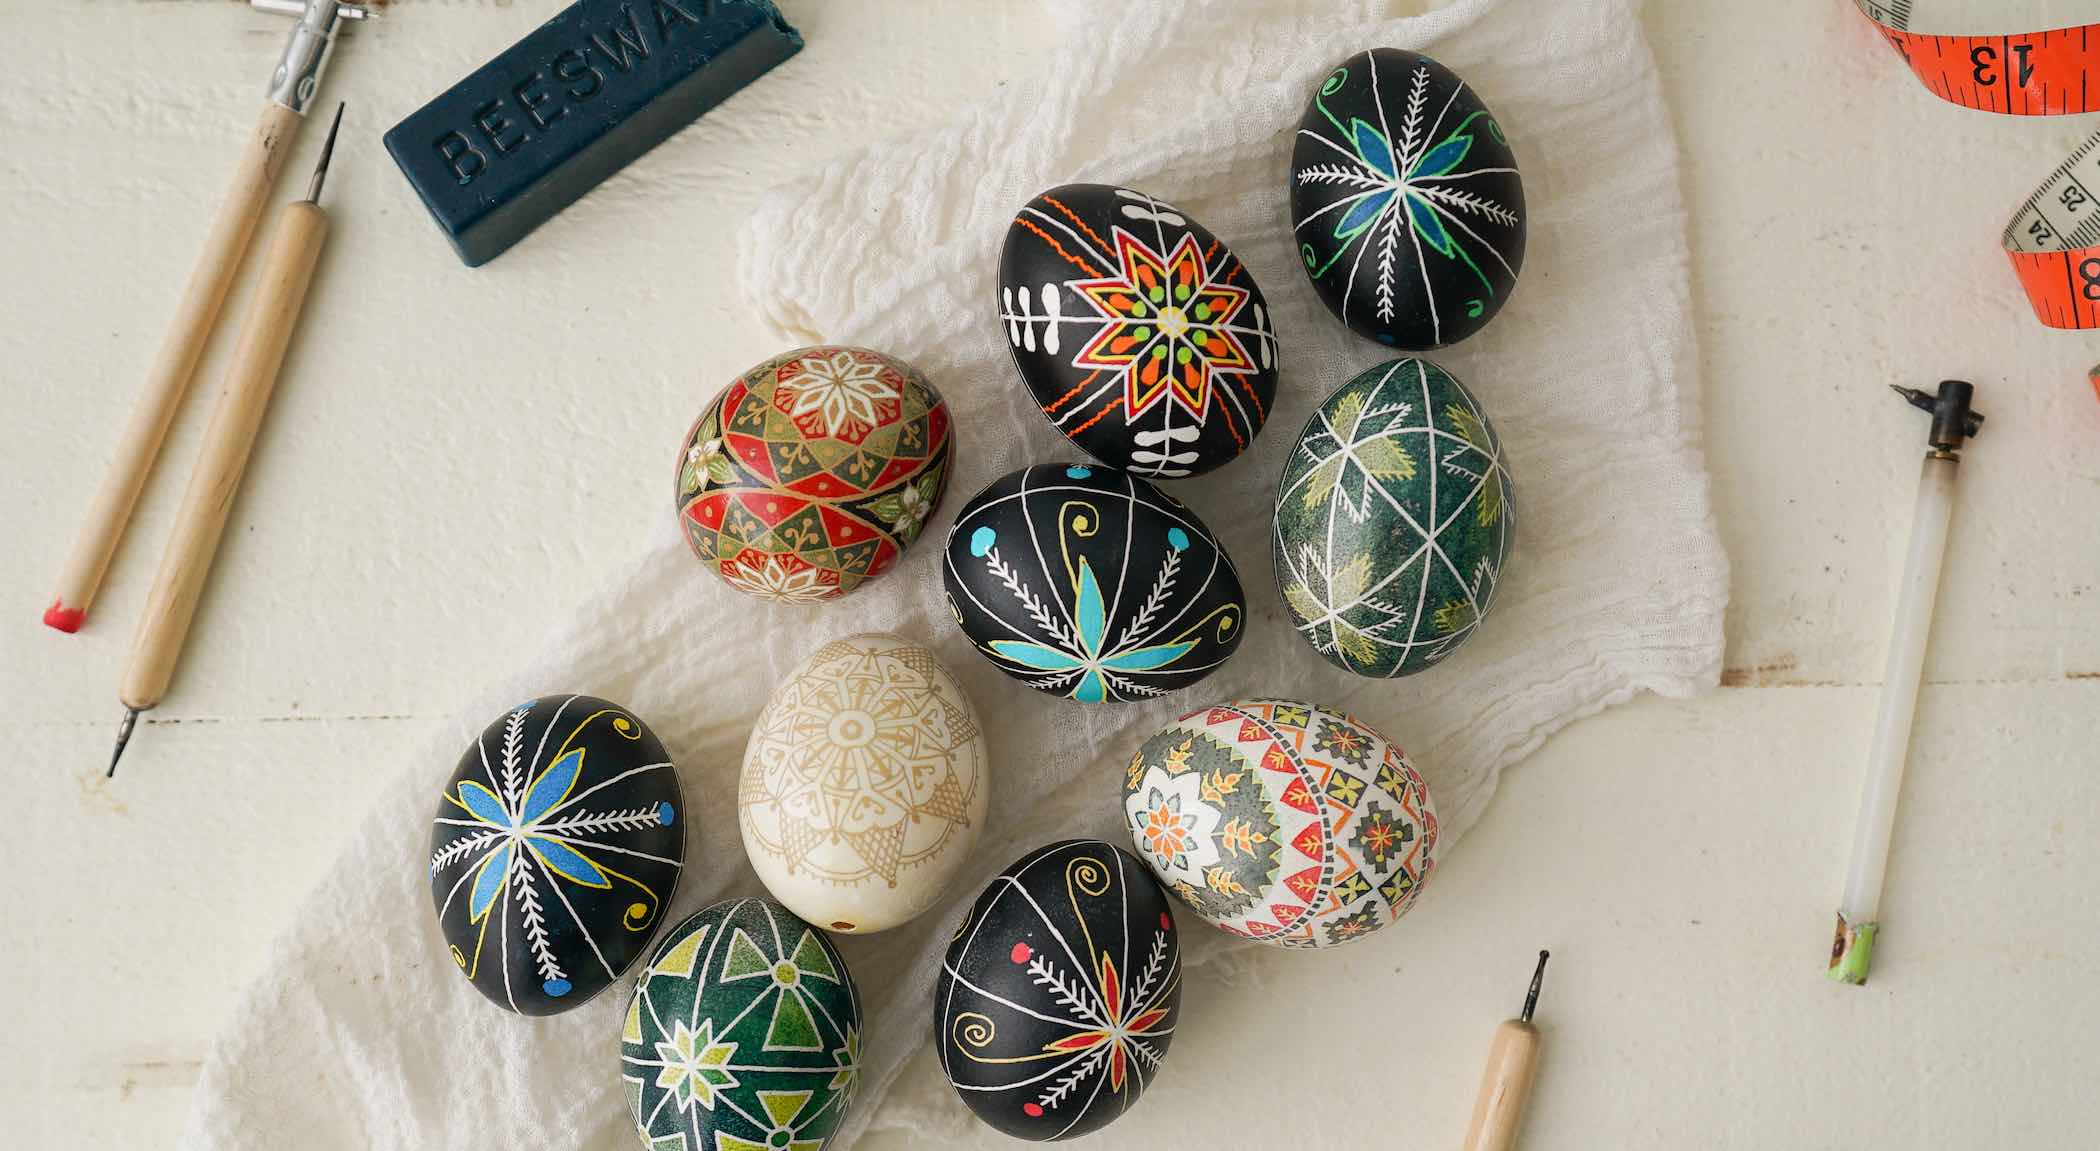 How to Make Pysanky Easter Eggs